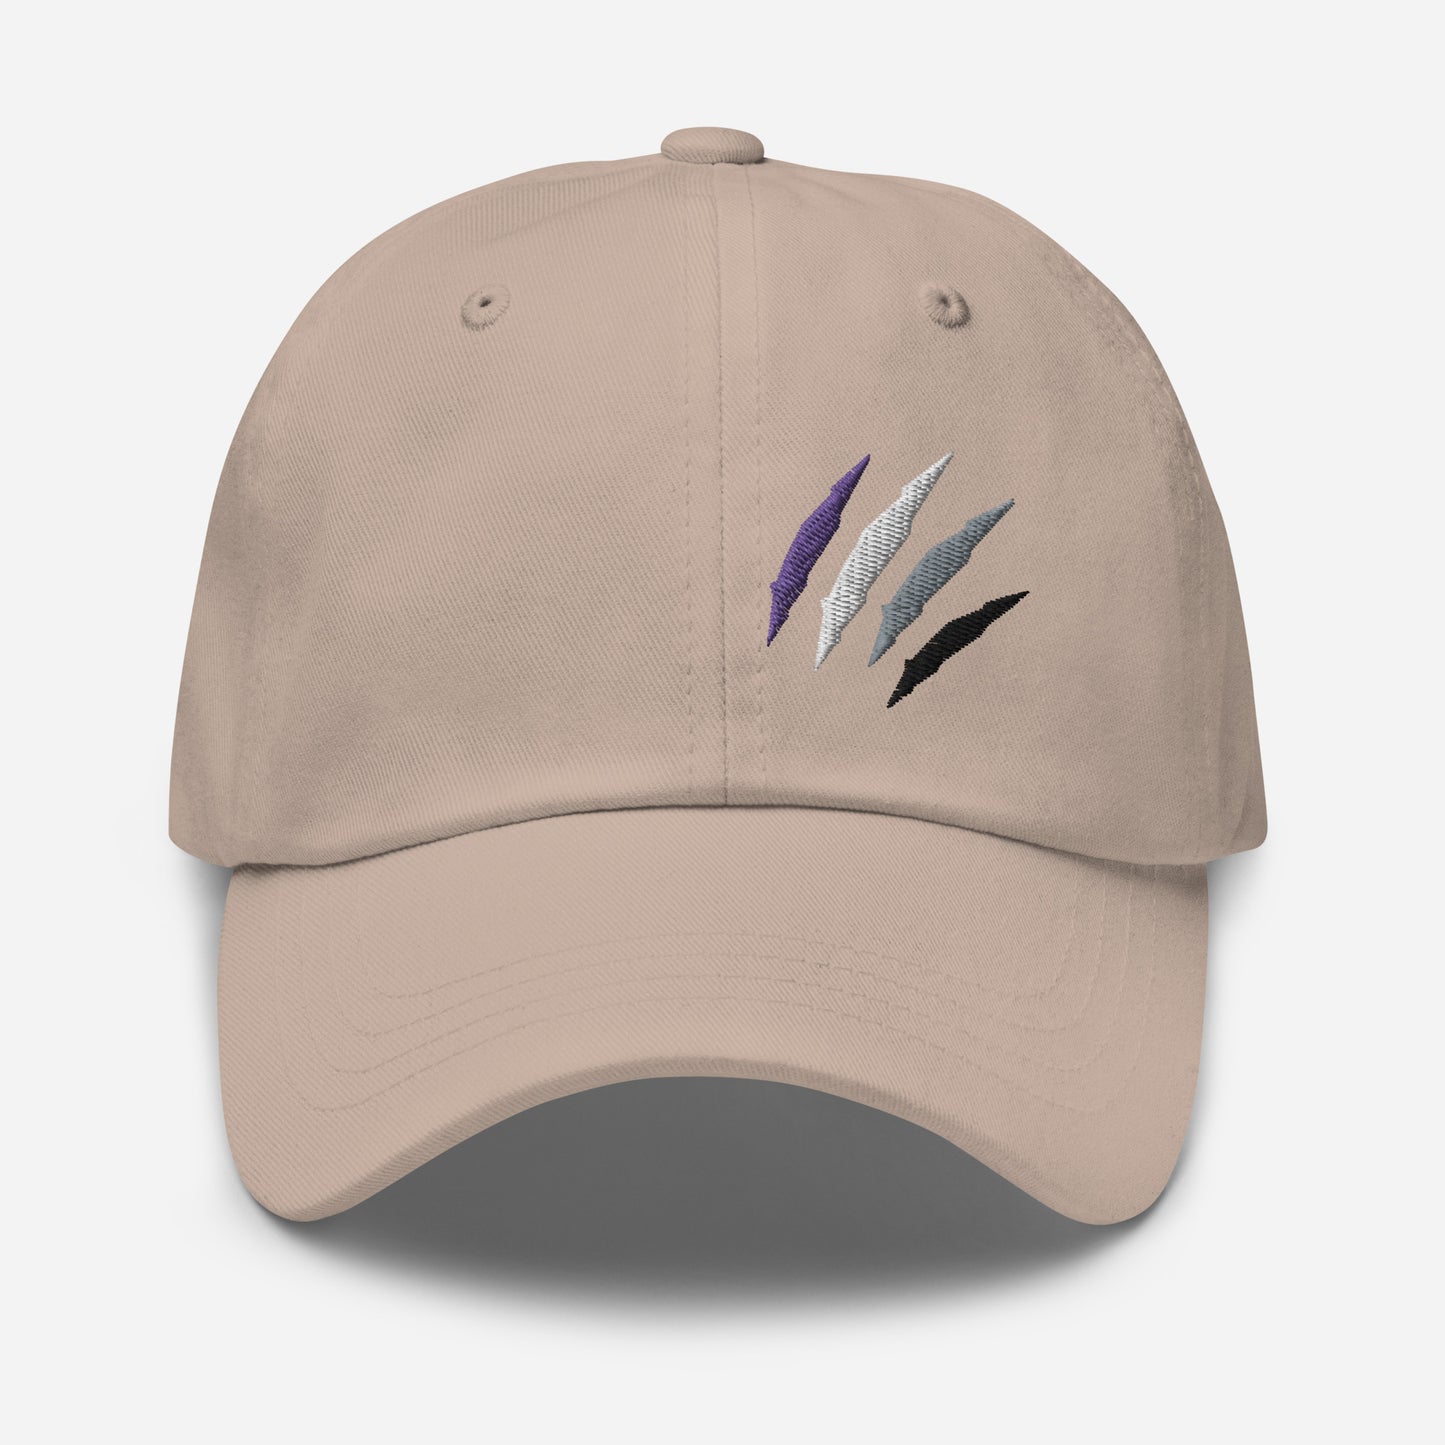 Baseball hat featuring asexual pride scratch mark embroidery in stone with a low profile, adjustable strap.